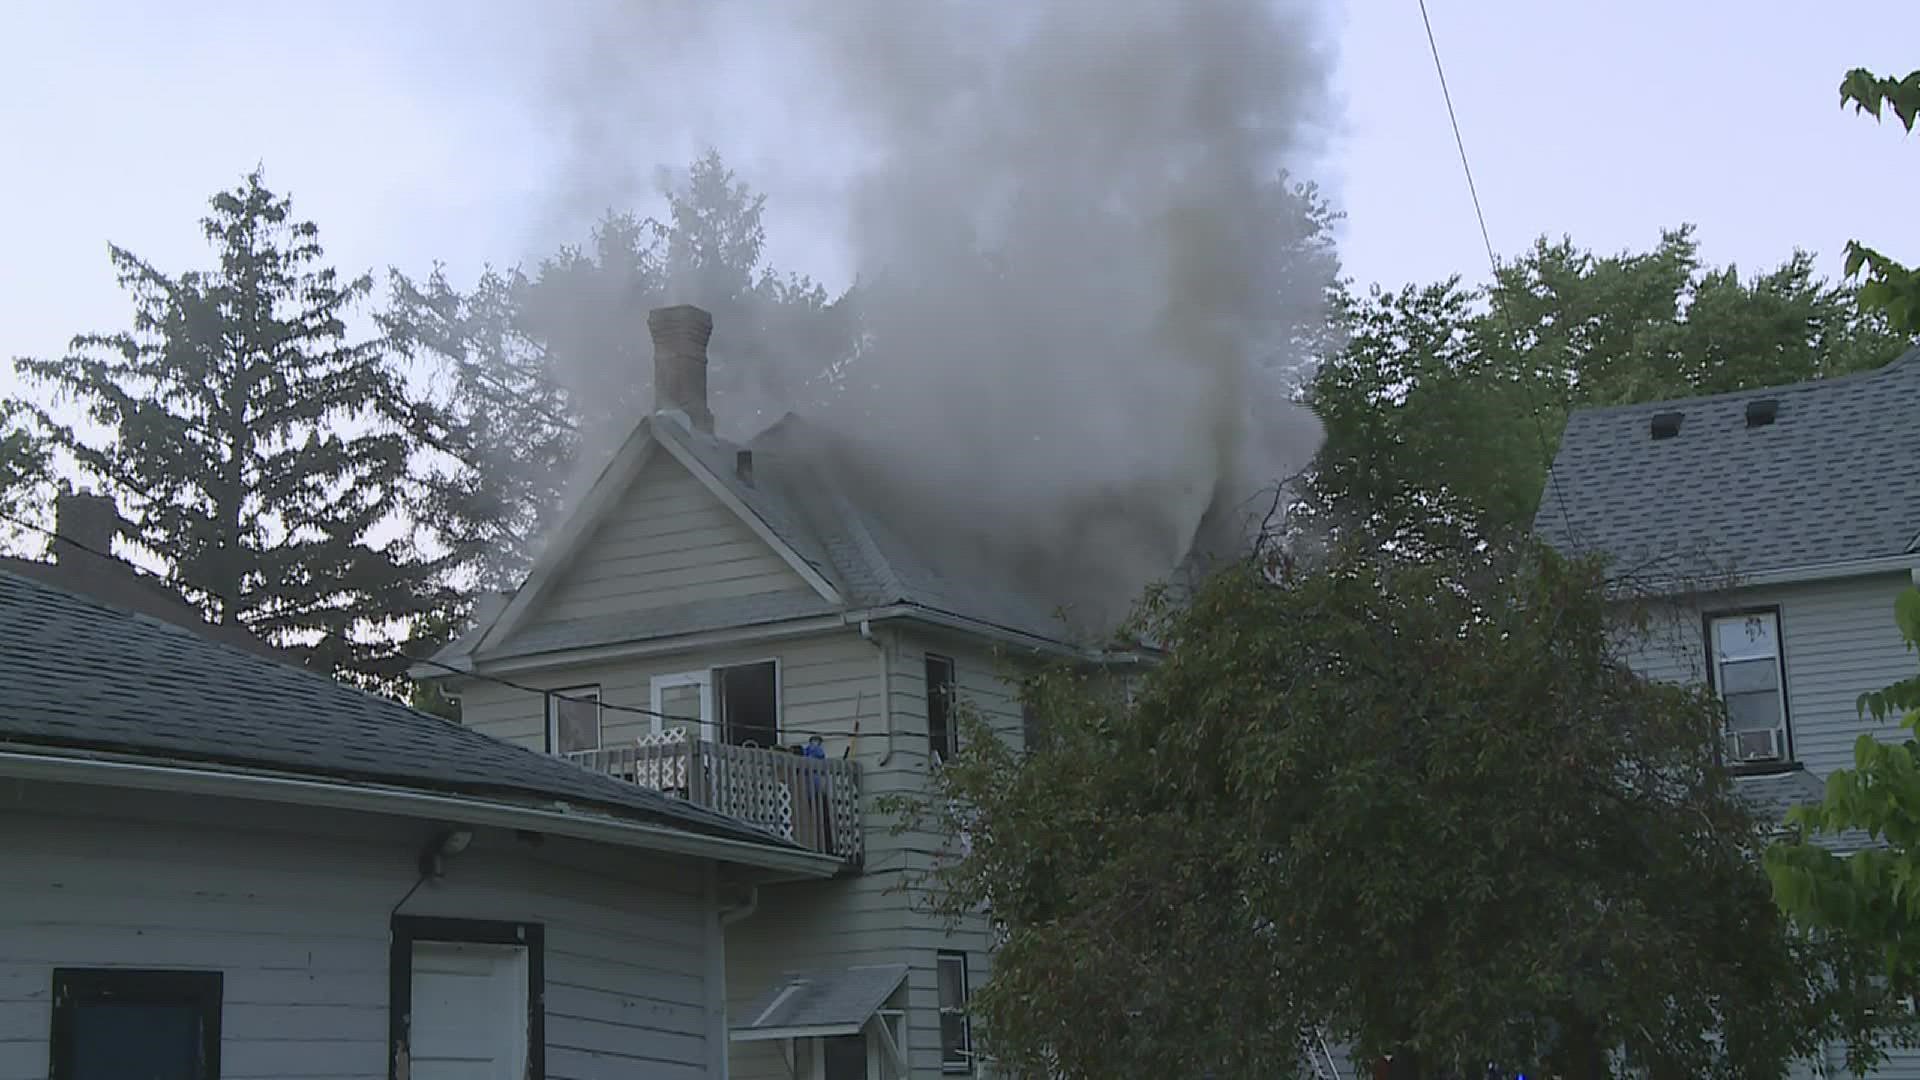 Firefighters arrived and found the three-story, two-family house fully engulfed.